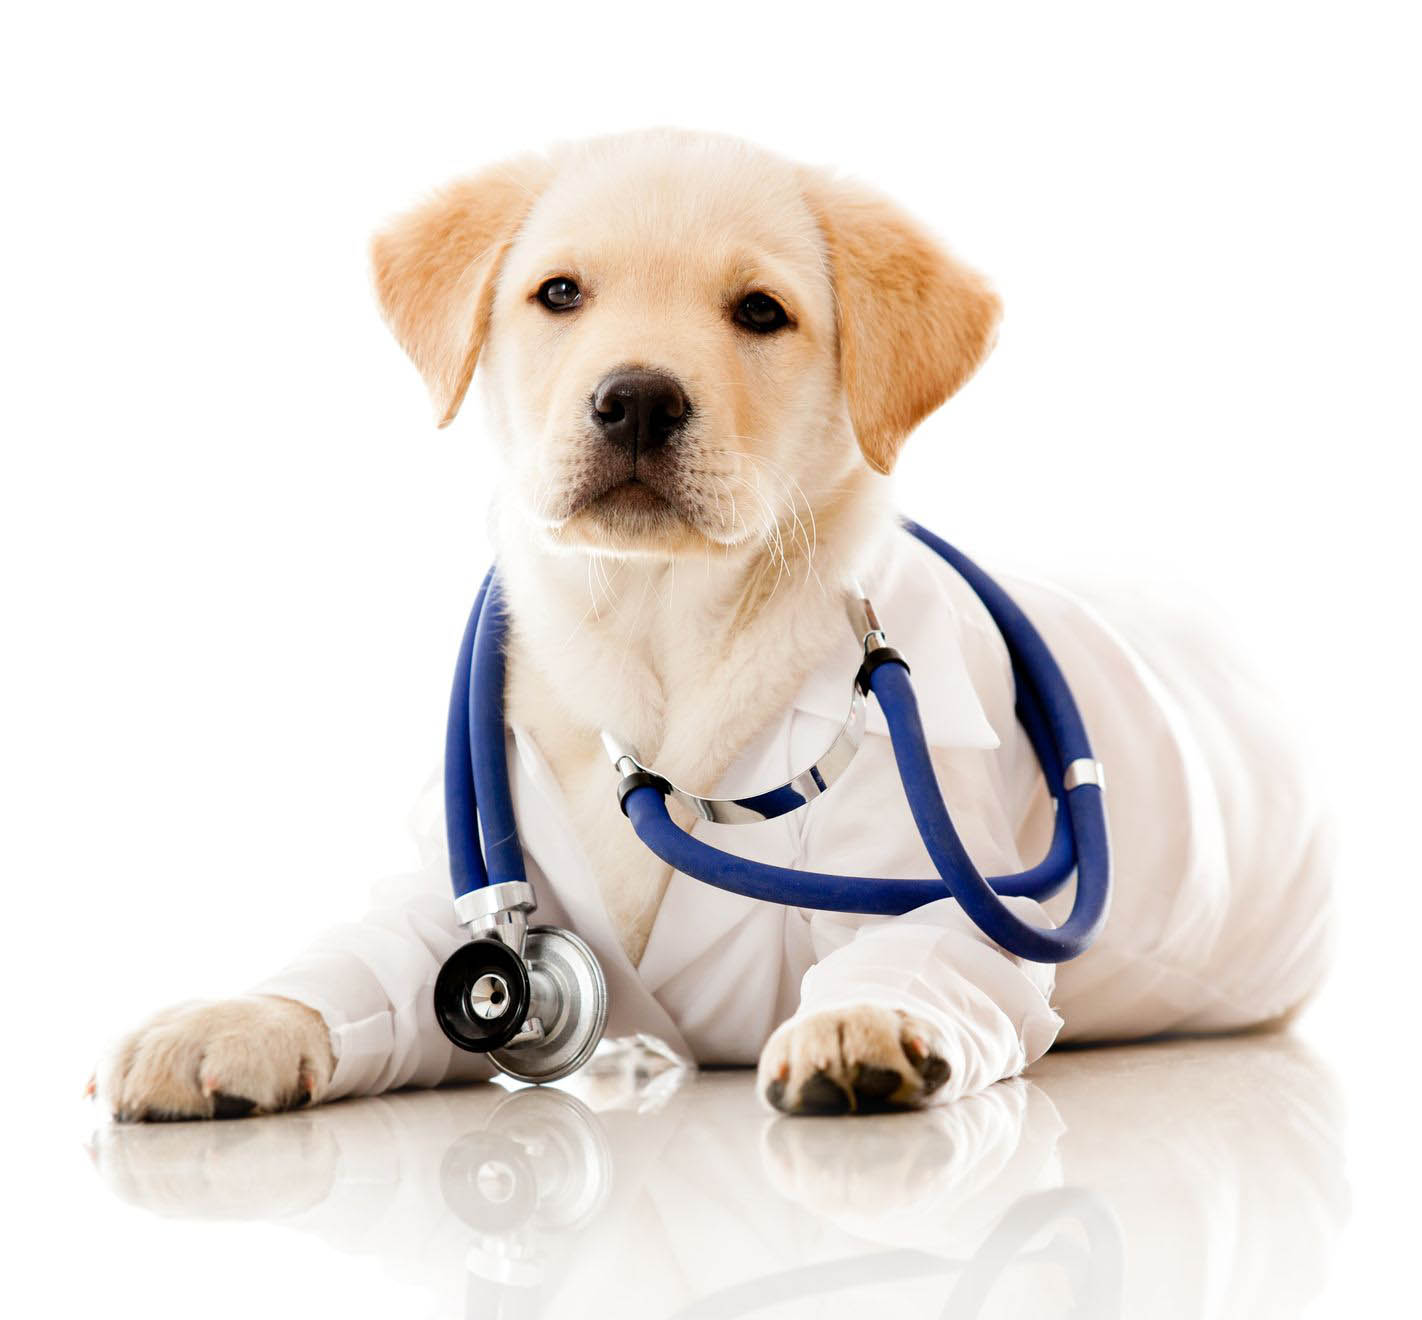 Has Your Dog Had All His Shots?